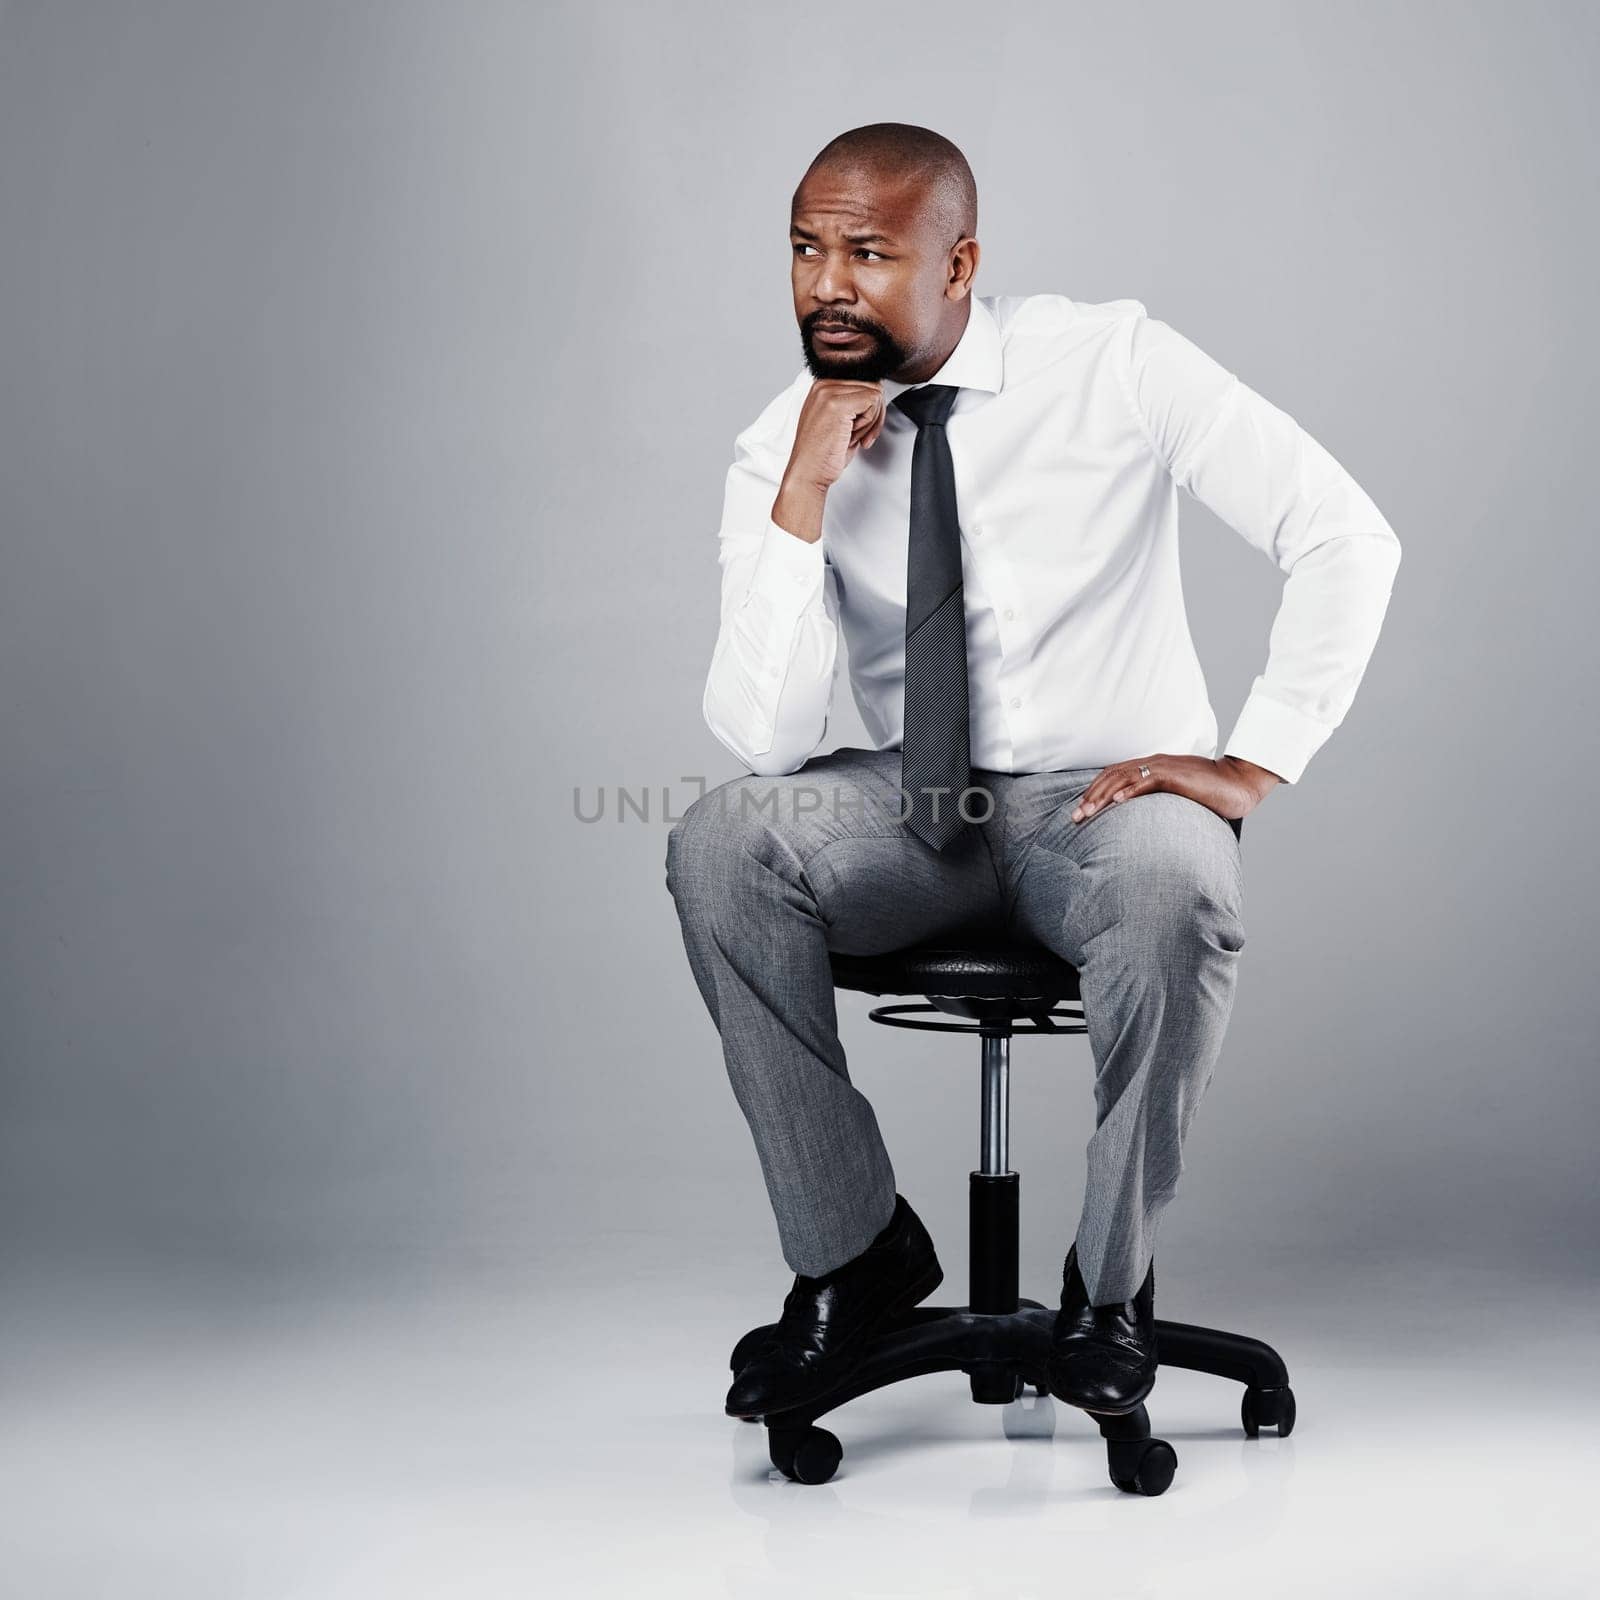 The price of success is hard work and determination. Studio shot of a corporate businessman sitting on a chair against a grey background. by YuriArcurs